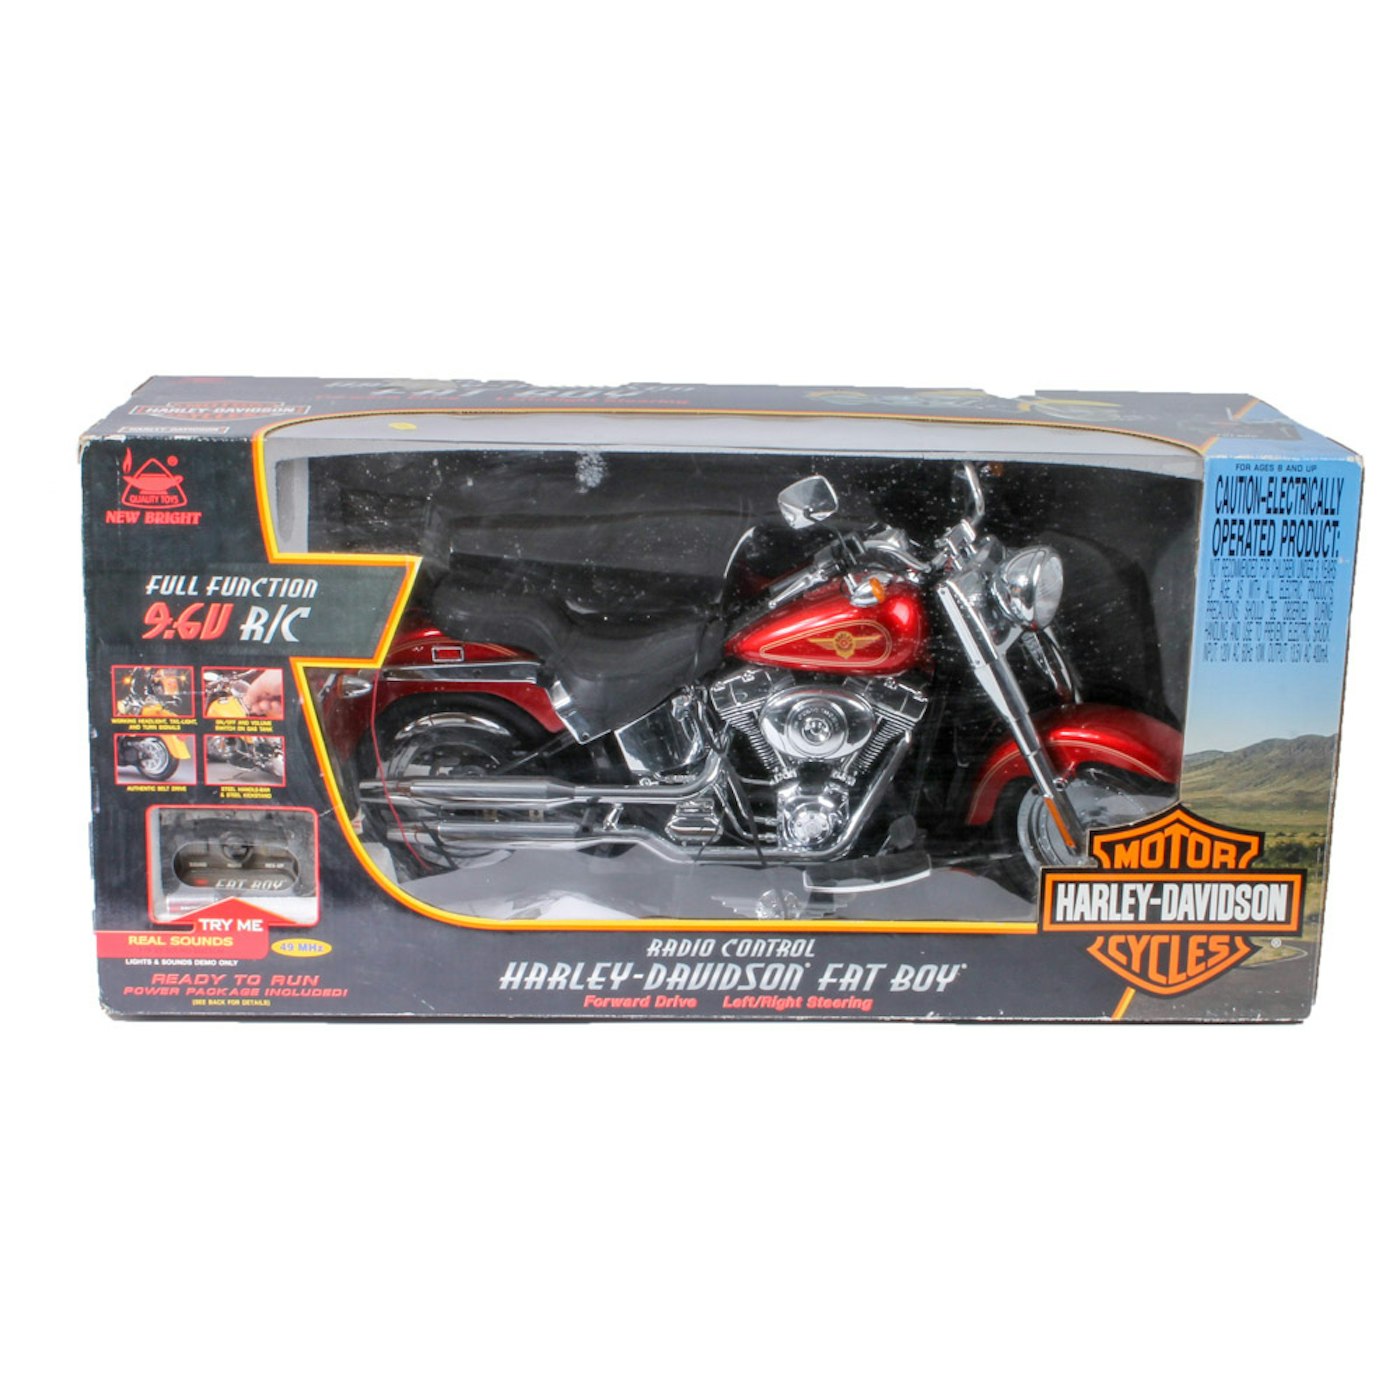  Remote  Control  Harley  Davidson  Fat  Boy  Toy Motorcycle  by 